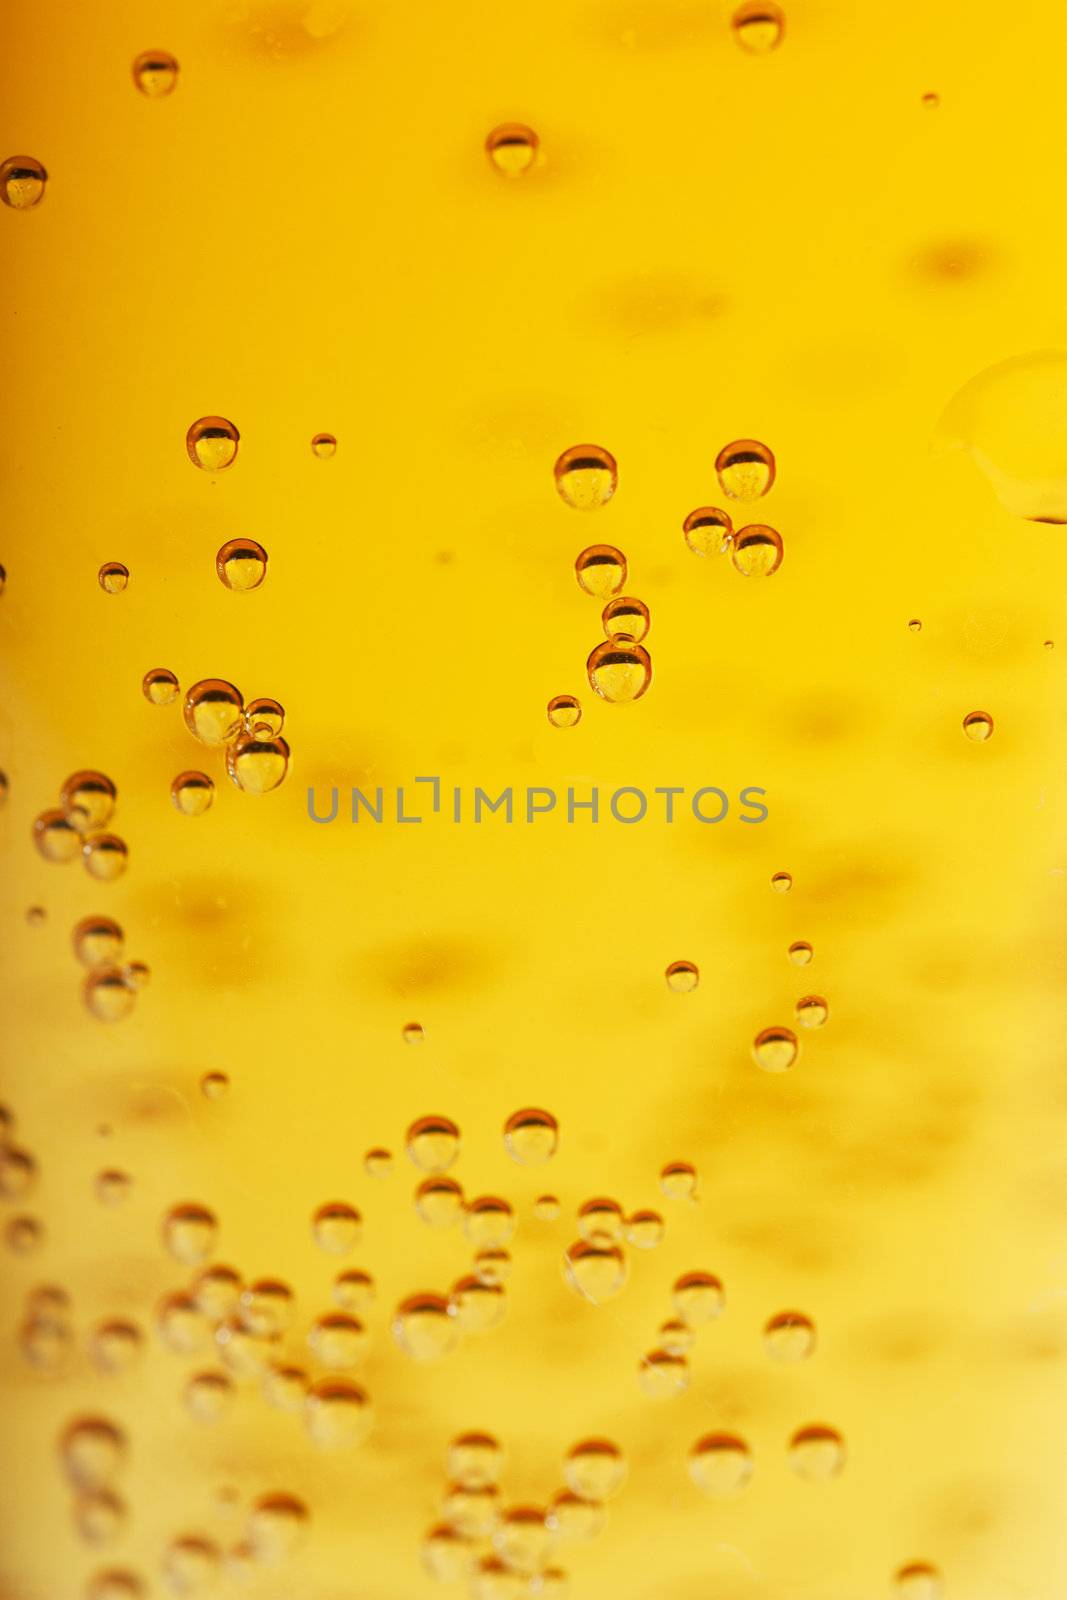 Orange beer with bubbles background. Closeup view.